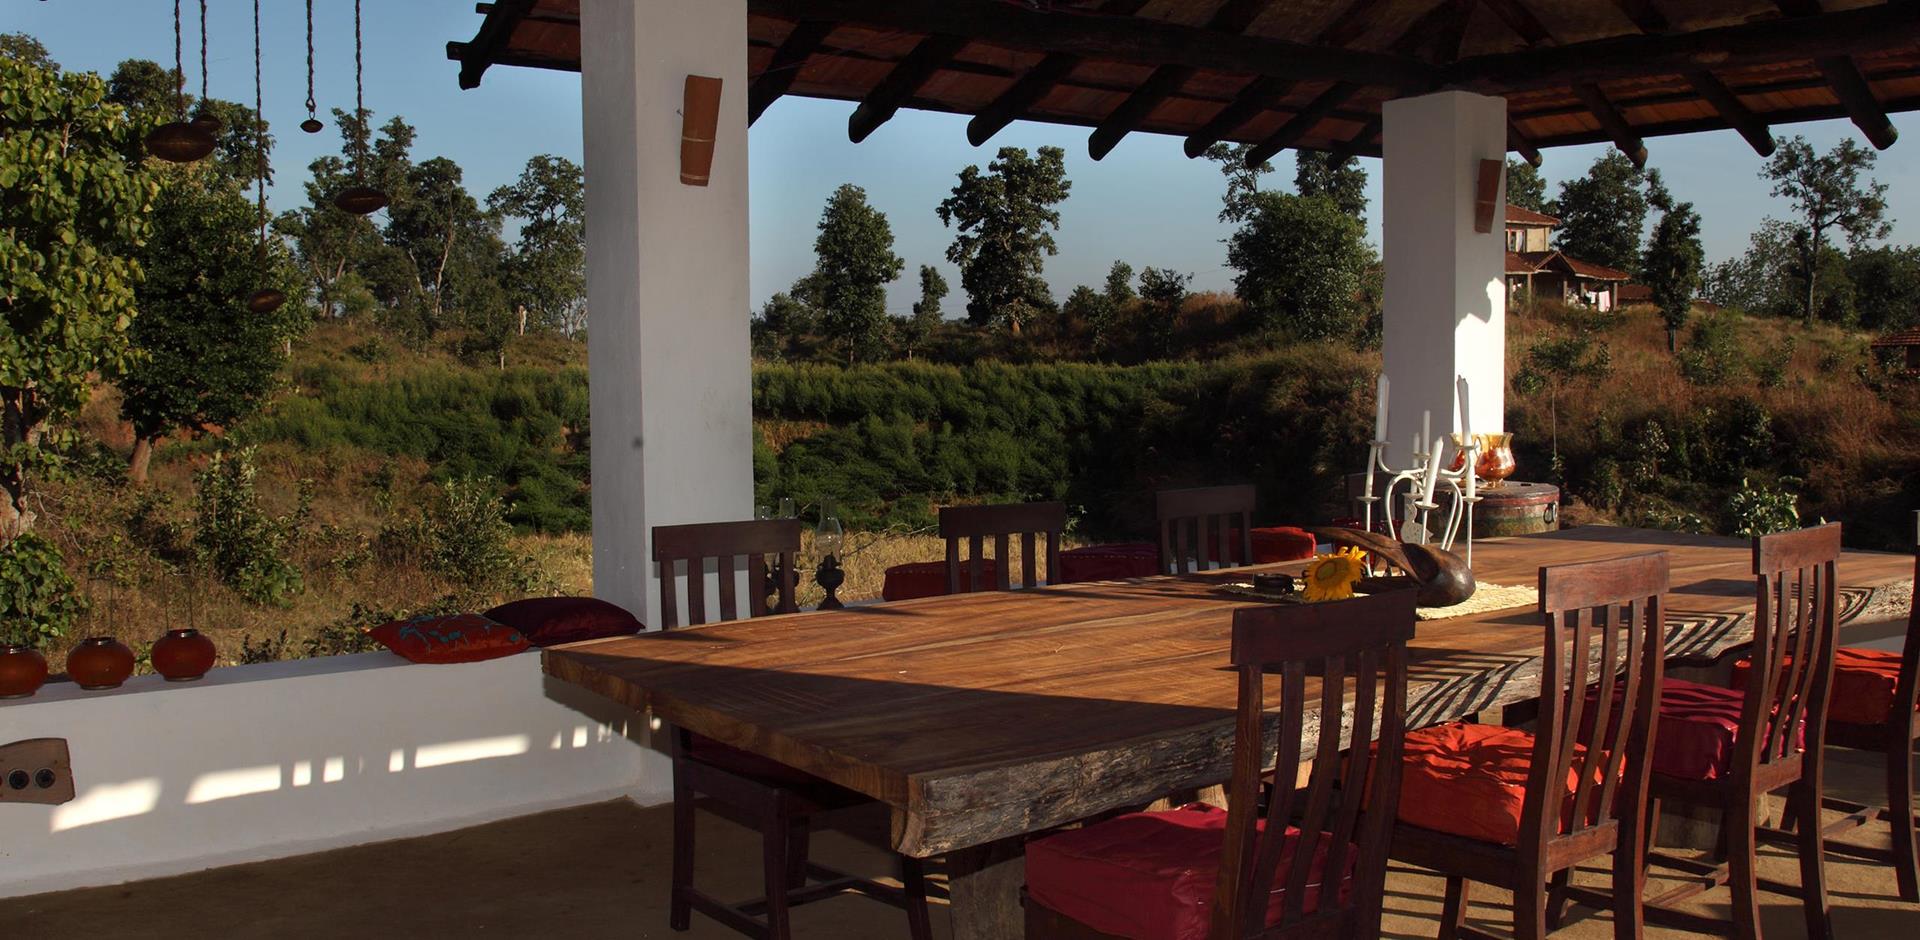 Outdoor dining, Flame of the Forest Safari Lodge, Kanha National Park, India